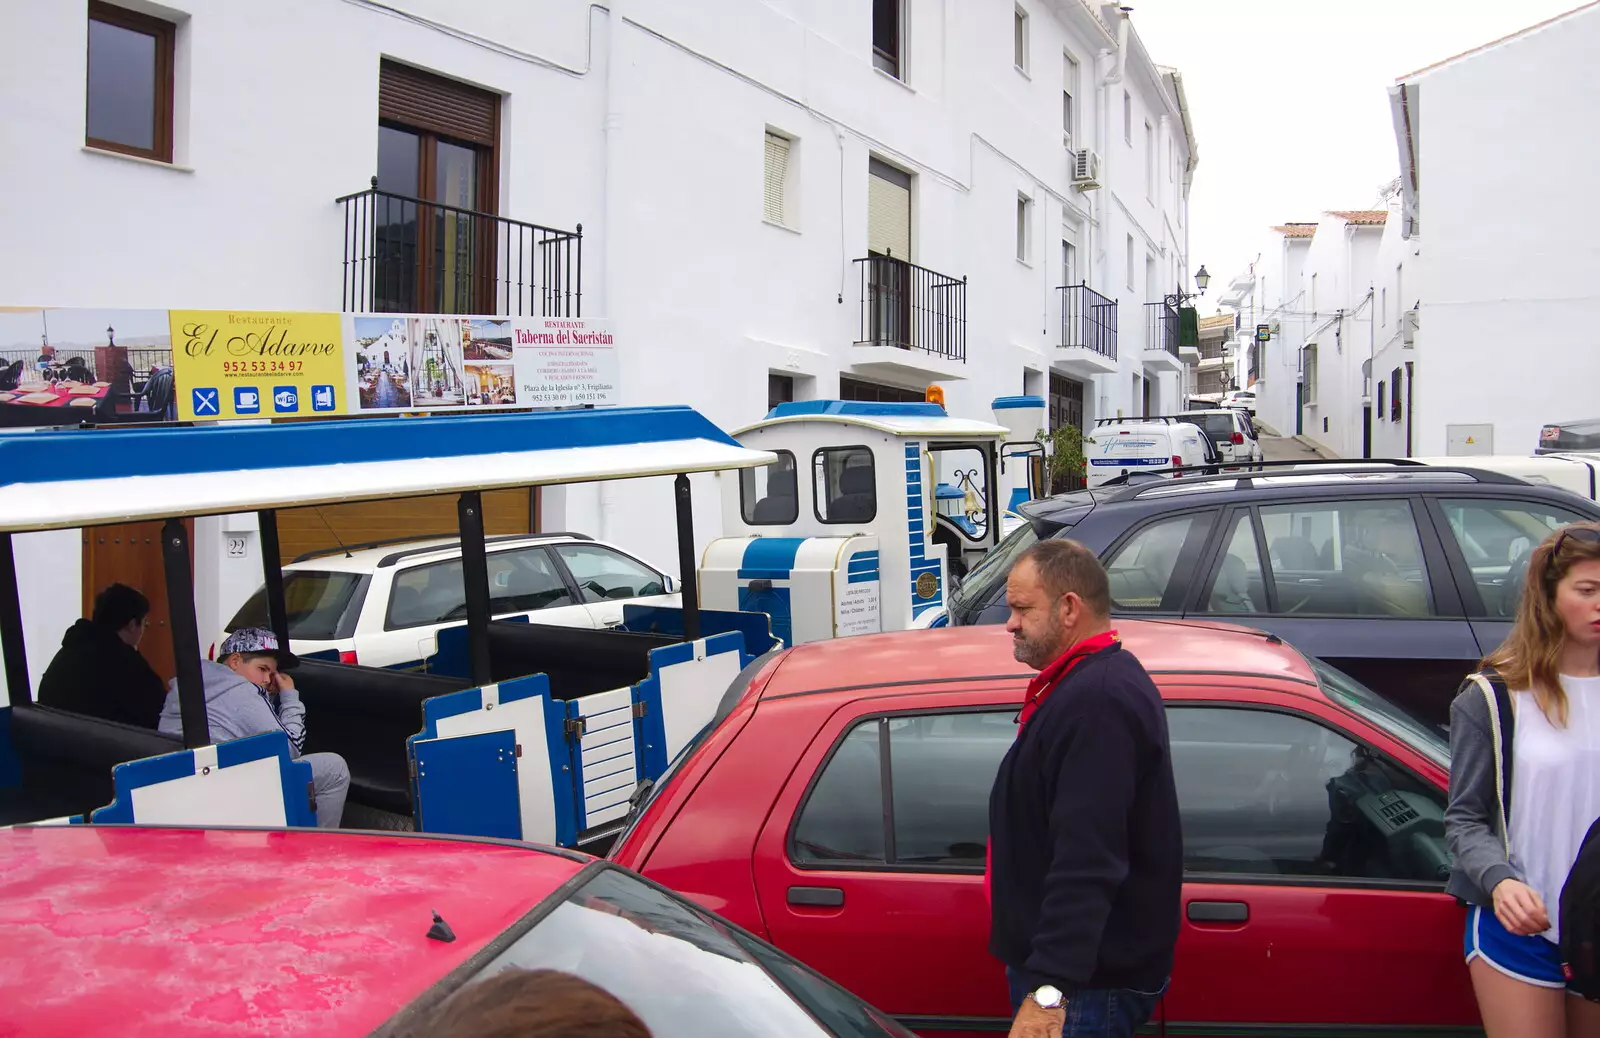 The tourist train has caused a blockage, from The Caves of Nerja, and Frigiliana, Andalusia, Spain - 18th April 2019